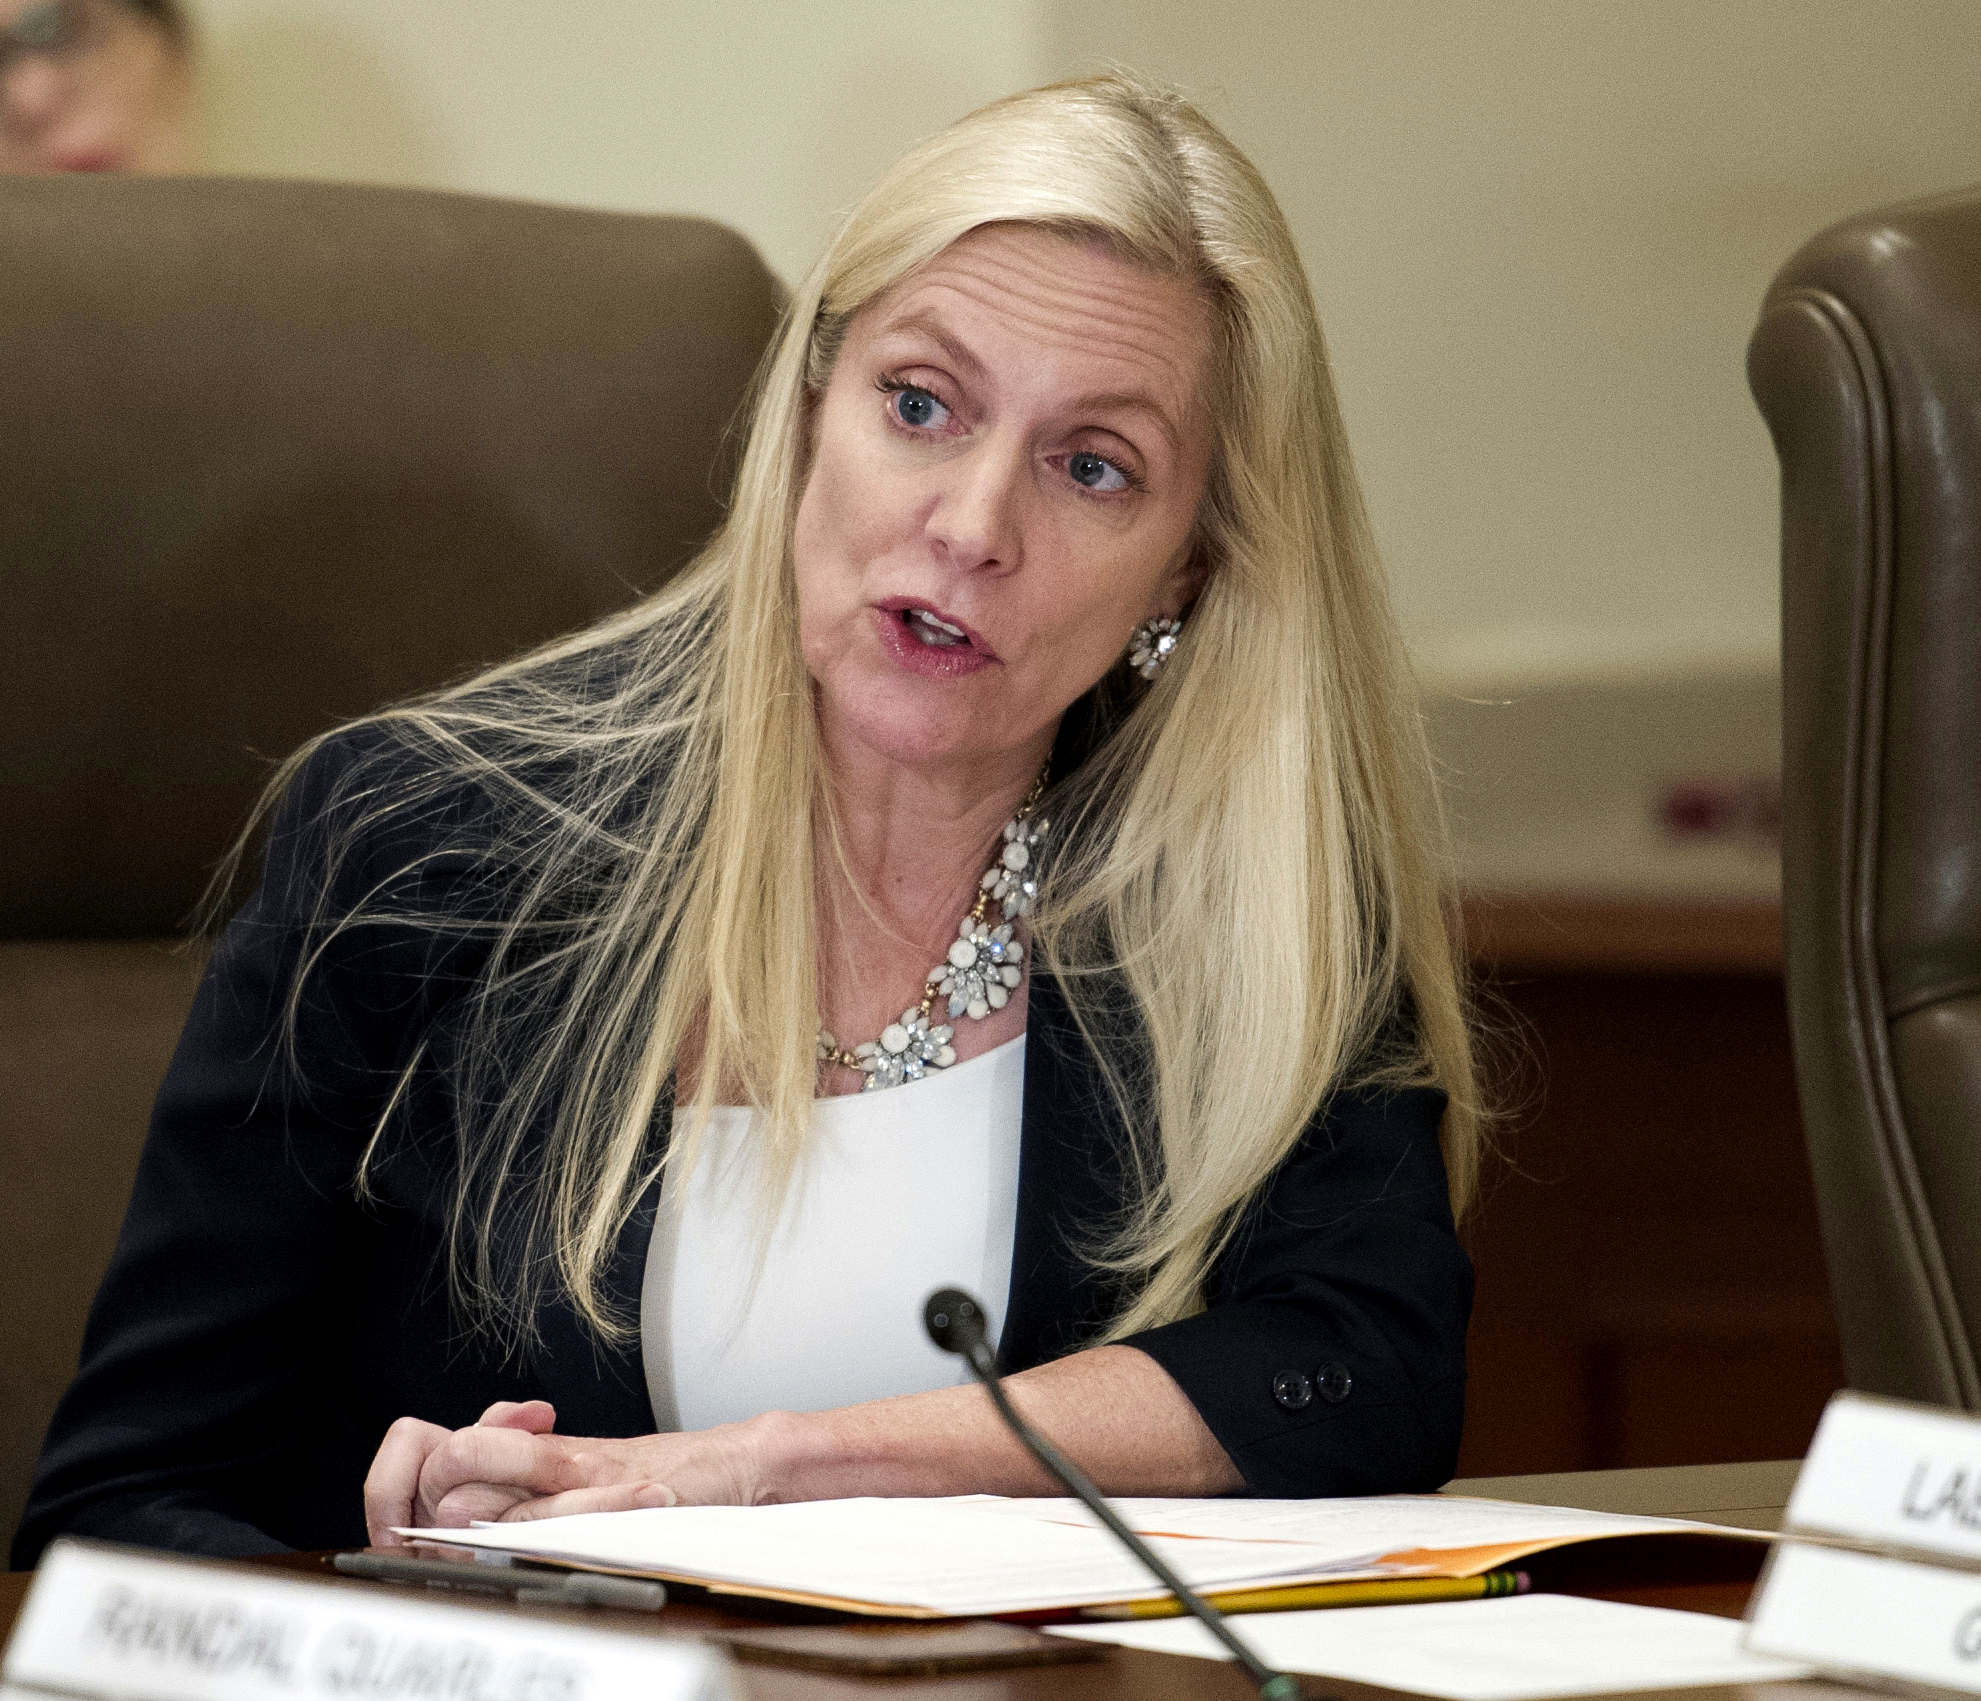 PHOTO: In this June 14, 2018 file photo Federal Reserve Board Governor Lael Brainard participates in an open meeting in Washington, D.C.